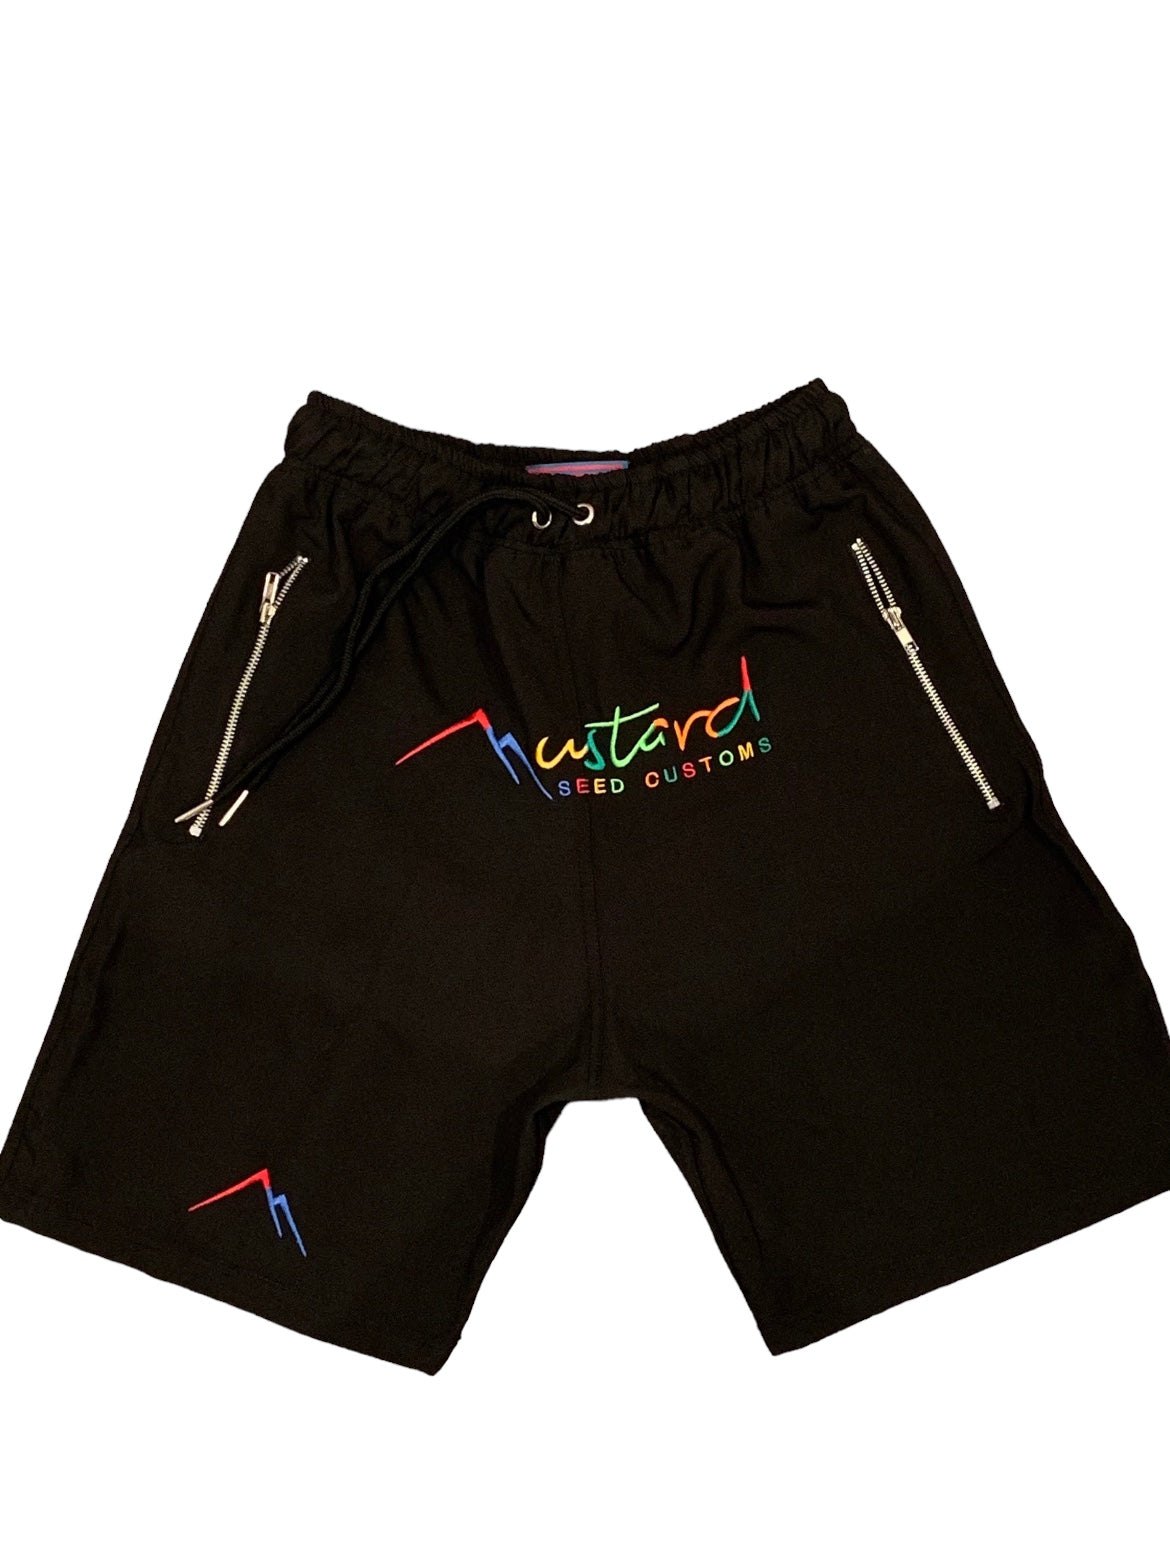 MSC Embroidery Shorts